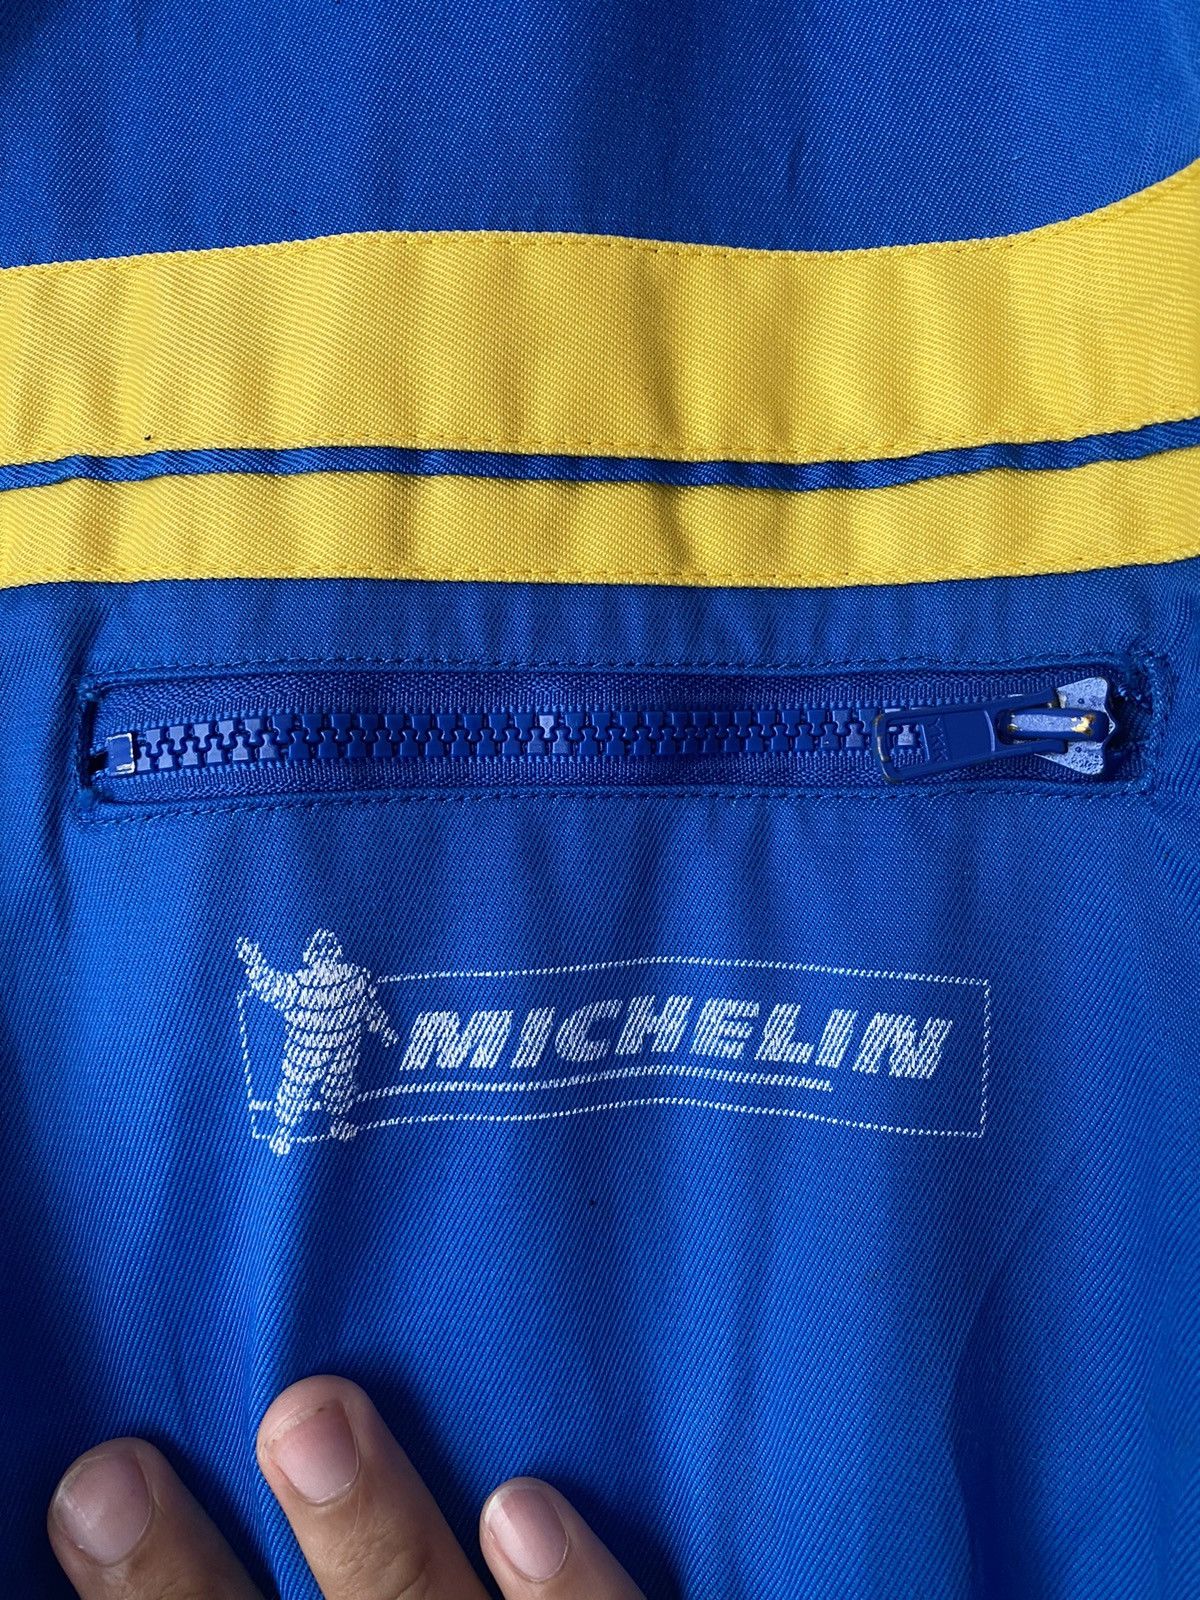 Sports Specialties - Vintage Michelin Racing Suit Overall - 4